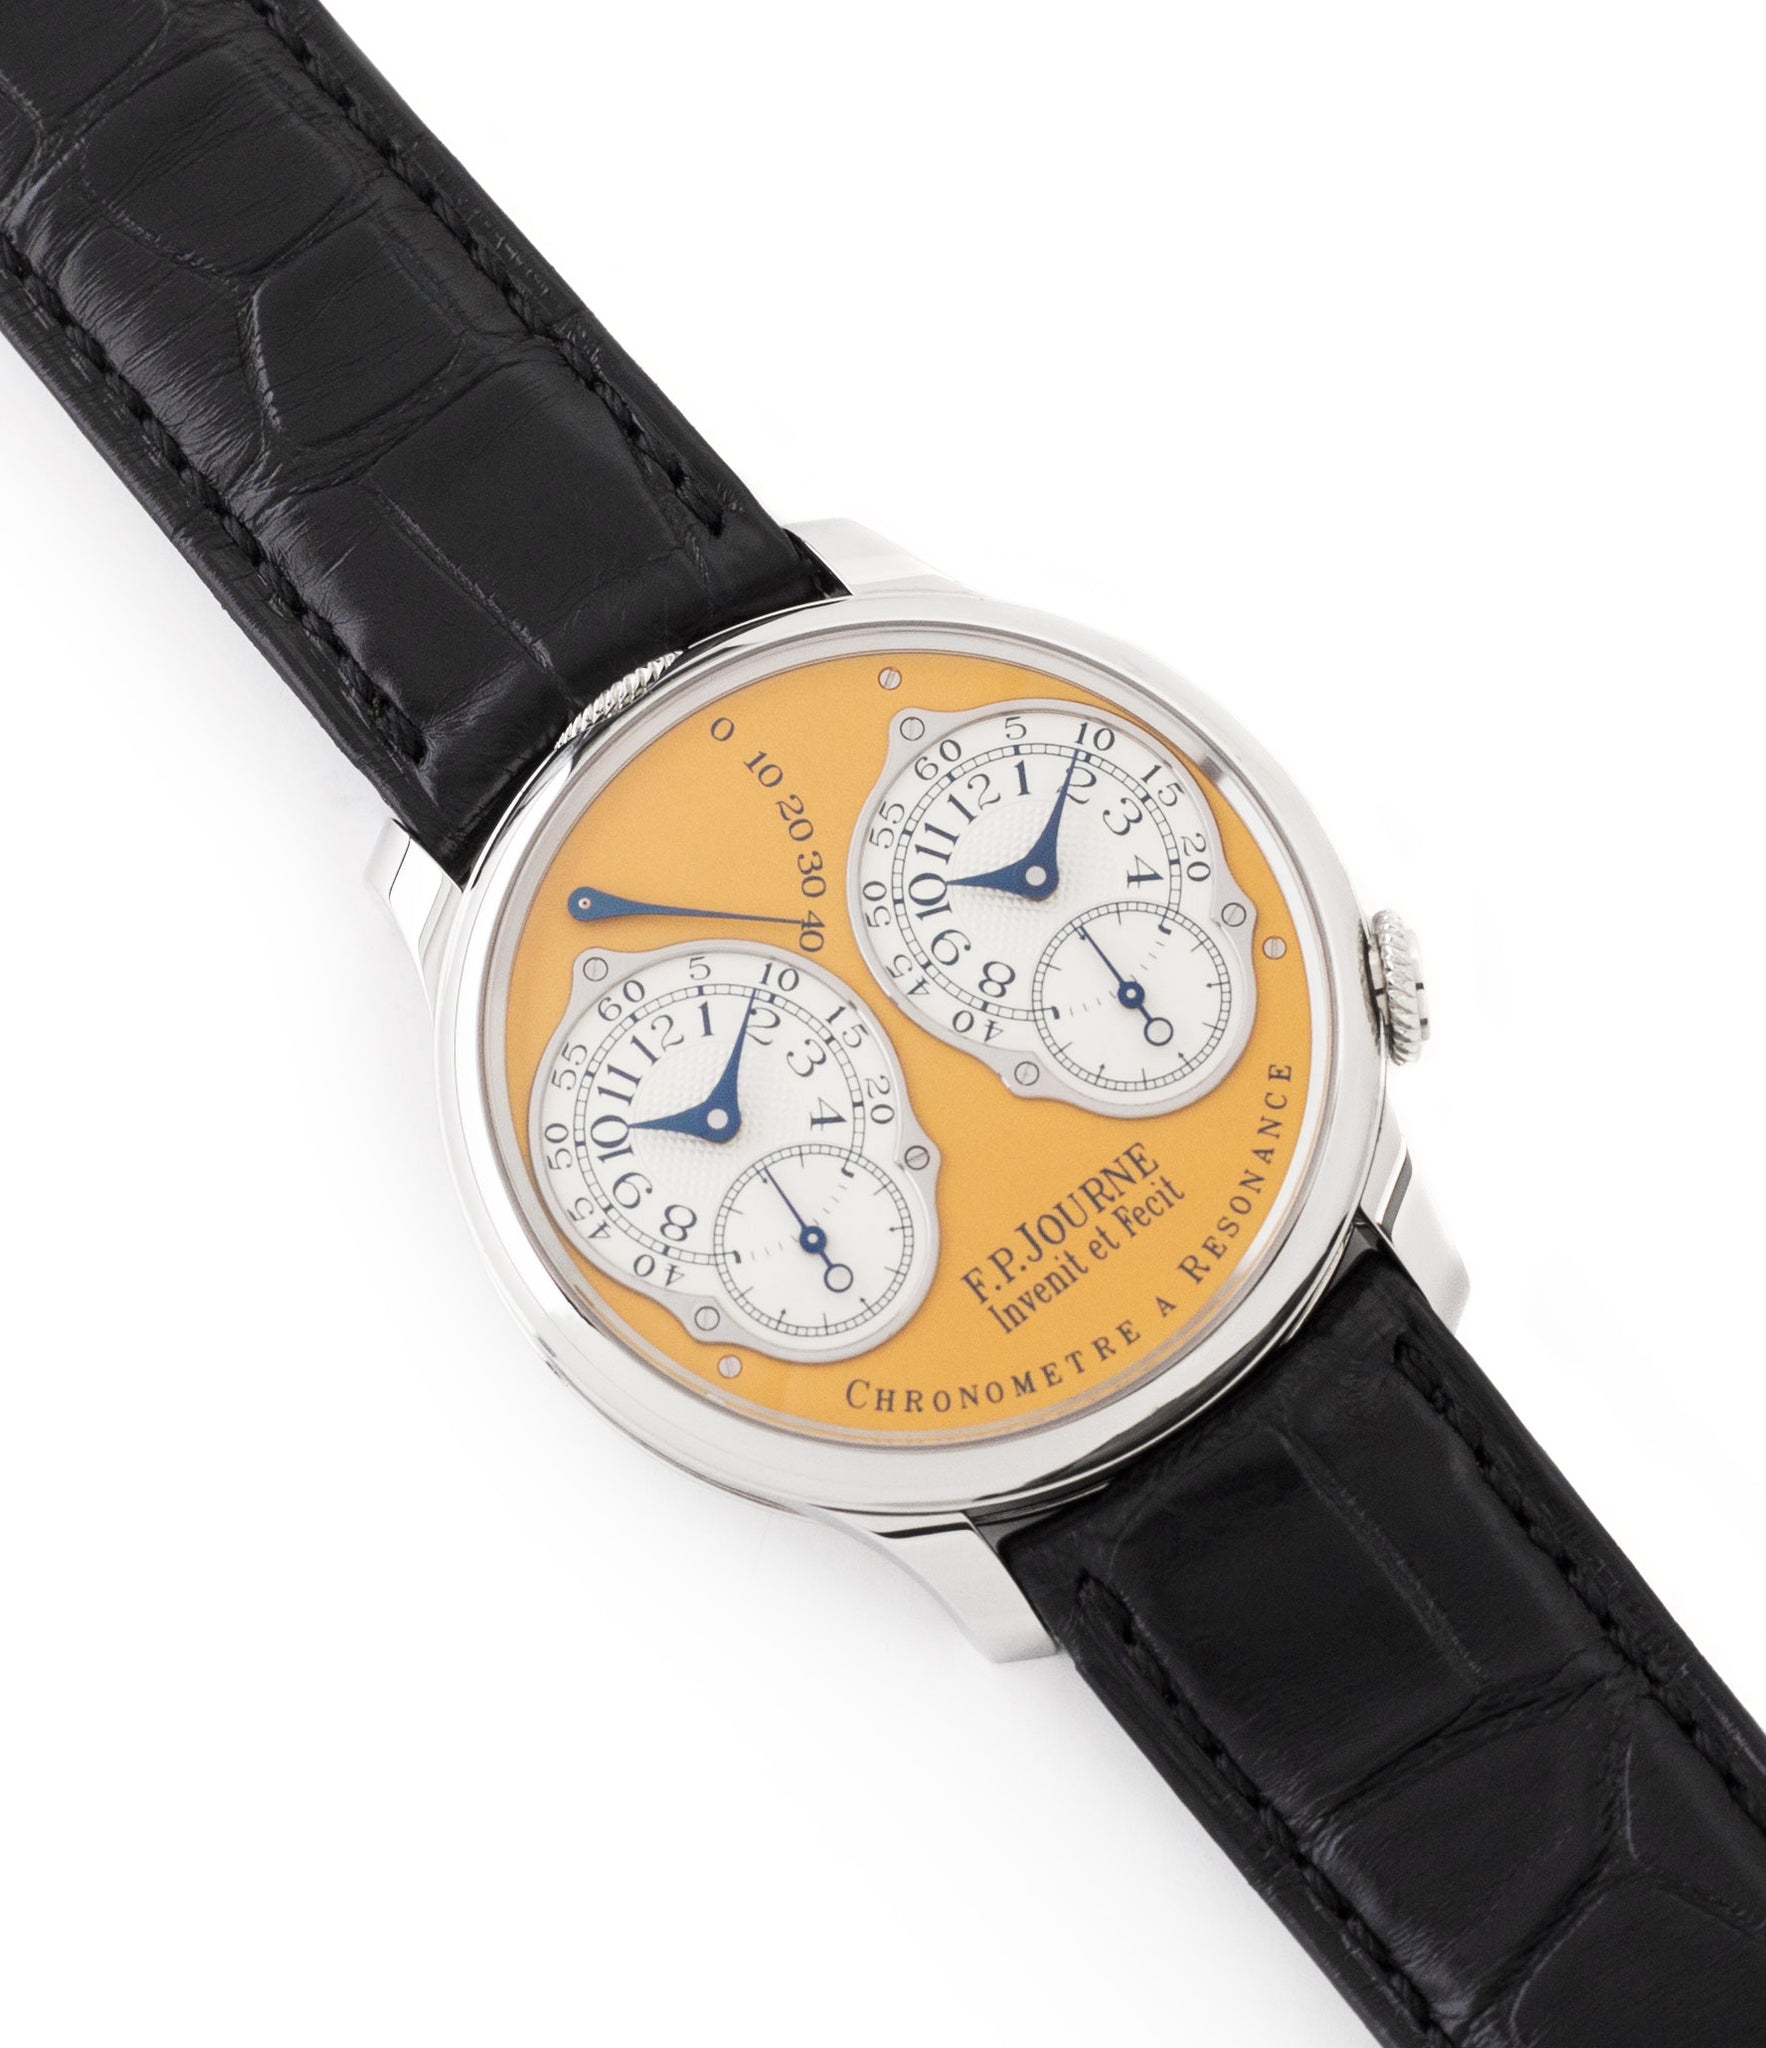 for sale F. P. Journe Chronomètre à Résonance Steel 38 mm Limited Edition Set of 5 watches for sale online at A Collected Man London approved UK retailer independent watchmakers